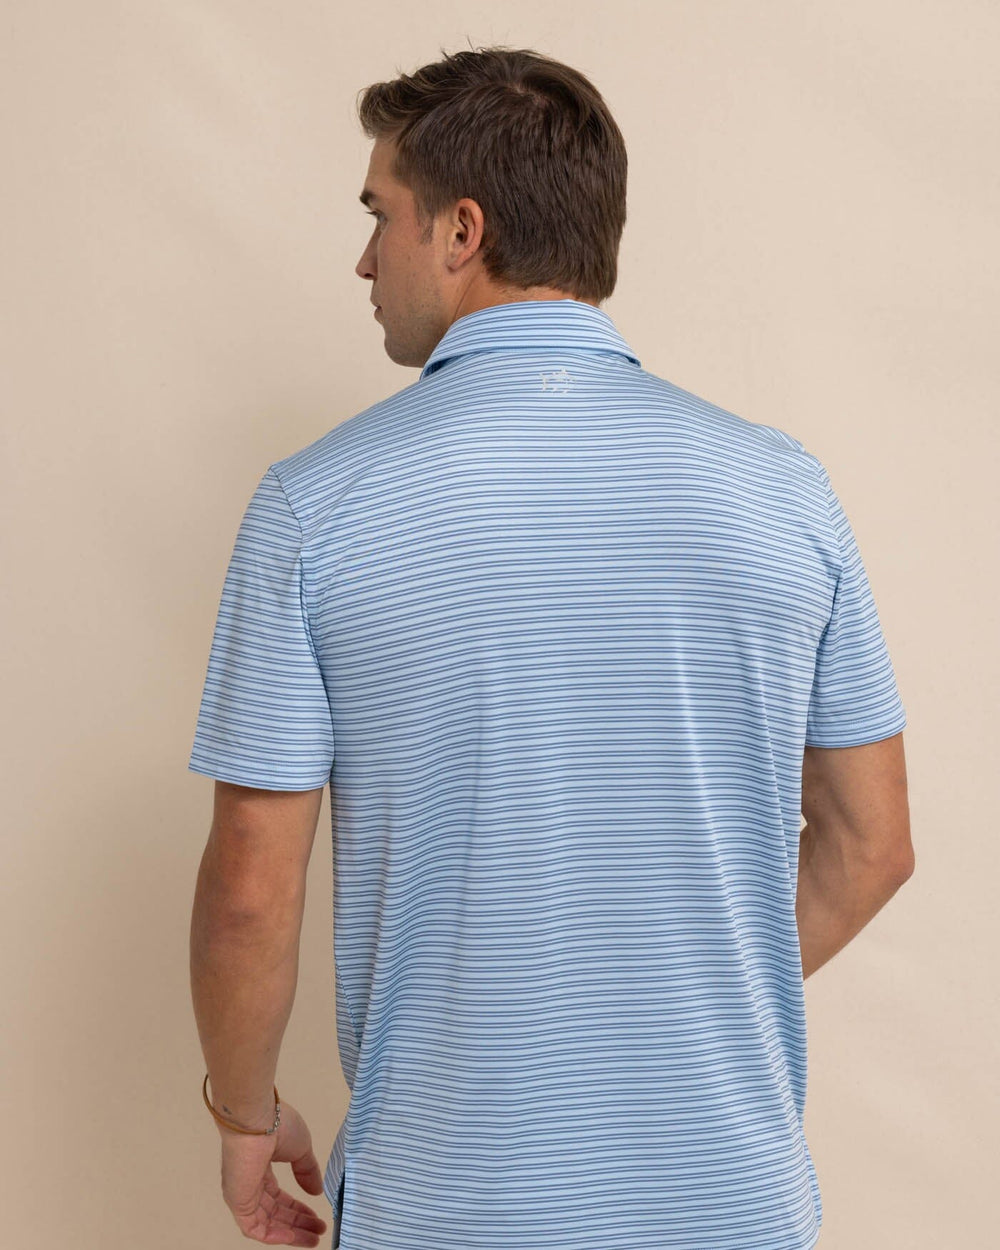 The back view of the Southern Tide Driver Baywoods Stripe Polo by Southern Tide - Clearwater Blue